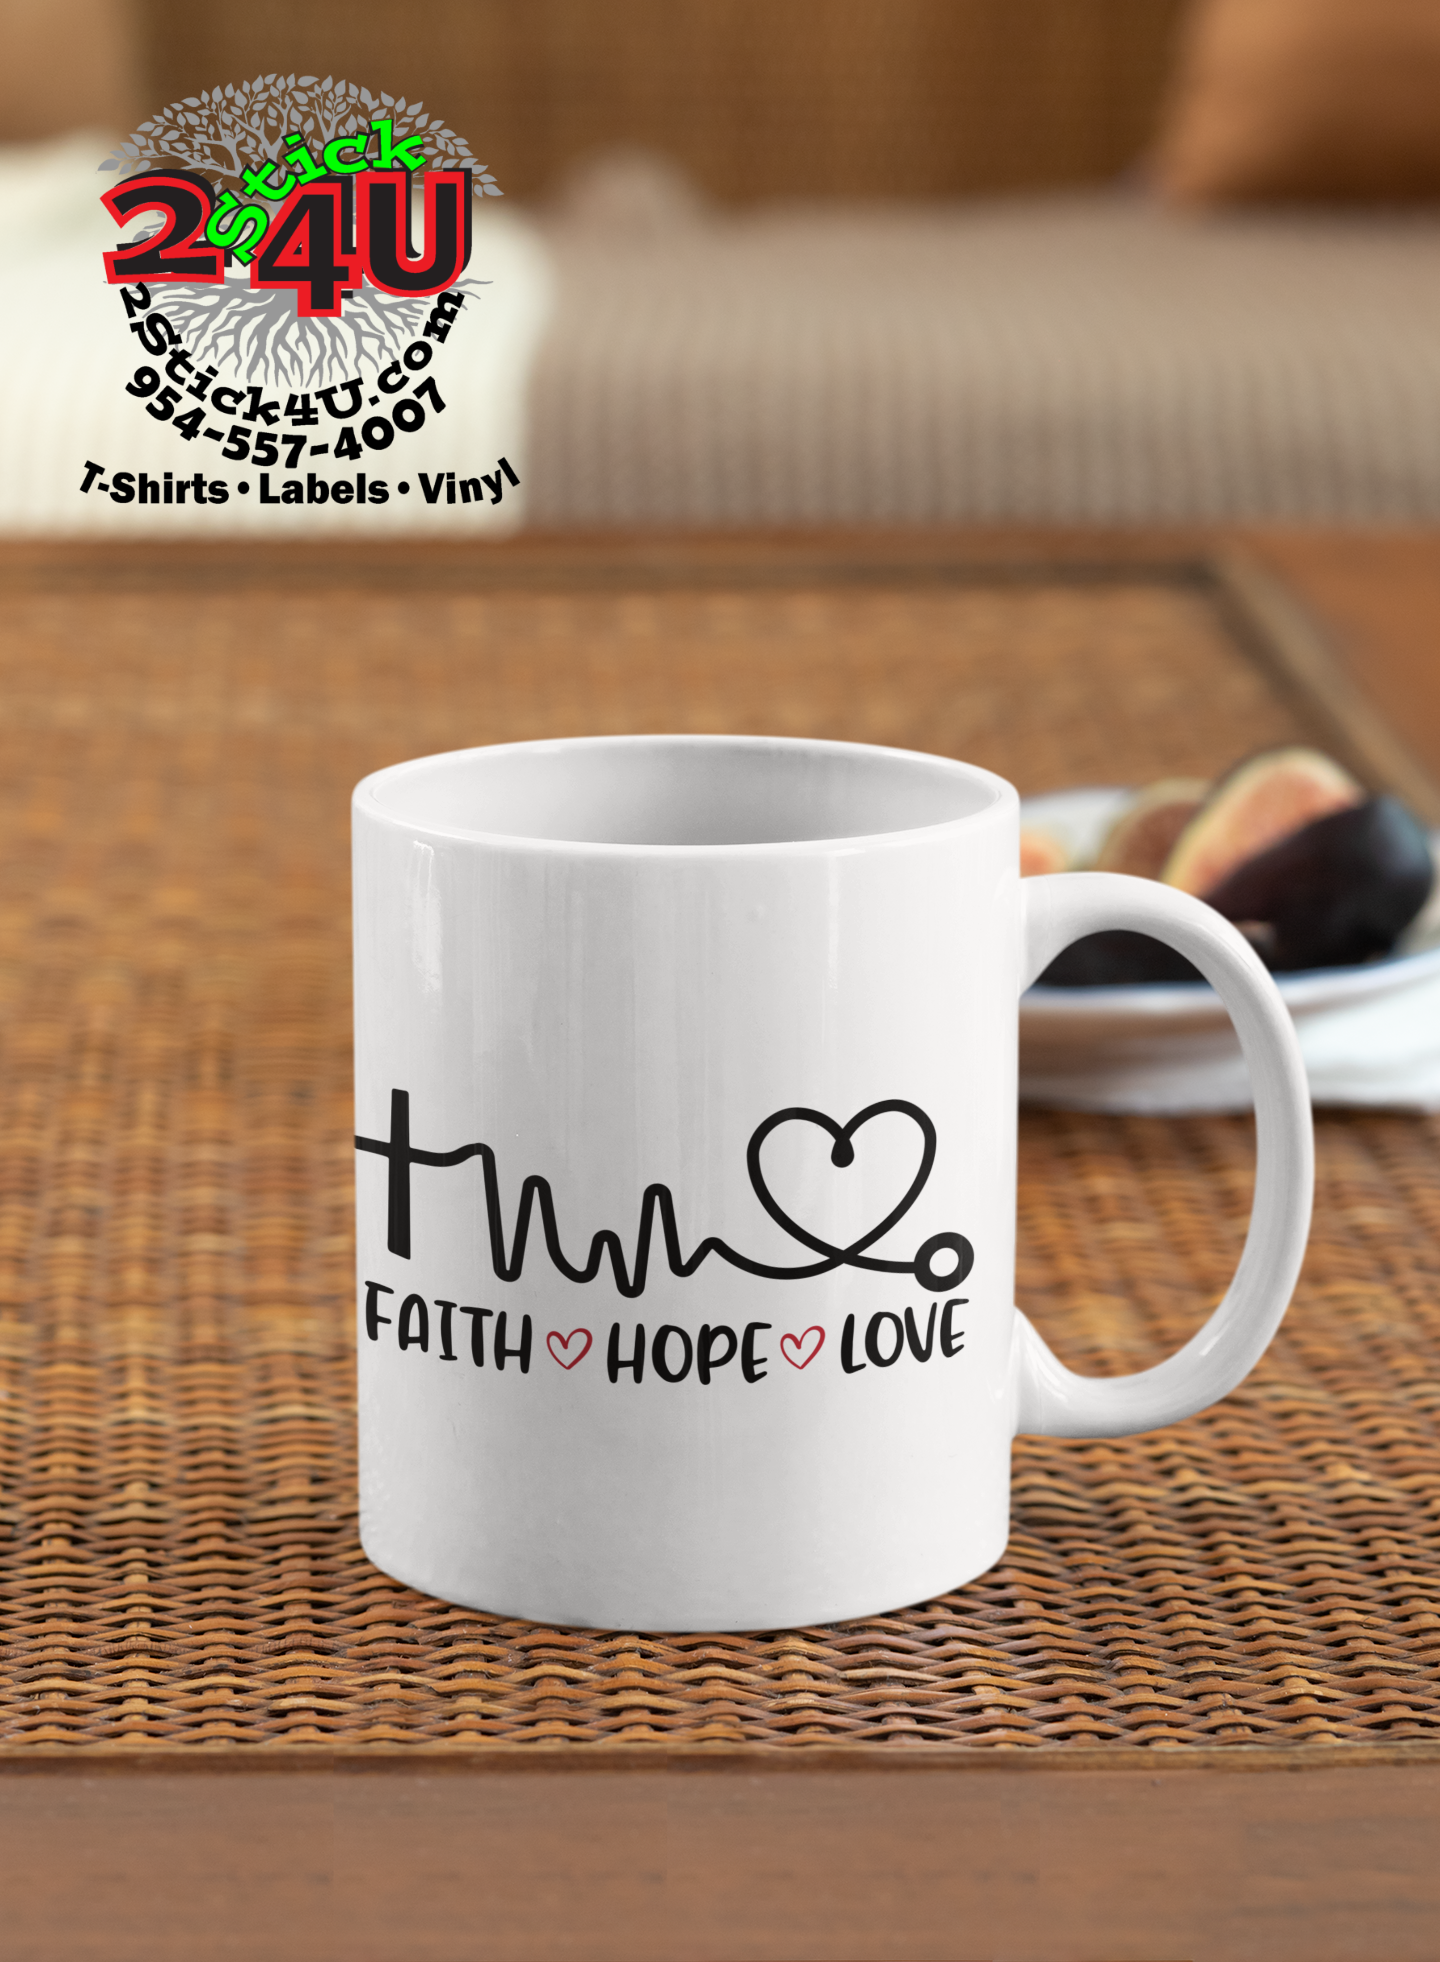 Faith*Hope*Love 2 Coffee Mug - Home of Buy 3, Get 1 Free. Long Lasting Custom Designed Coffee Mugs for Business and Pleasure. Perfect for Christmas, Housewarming, Wedding Party gifts